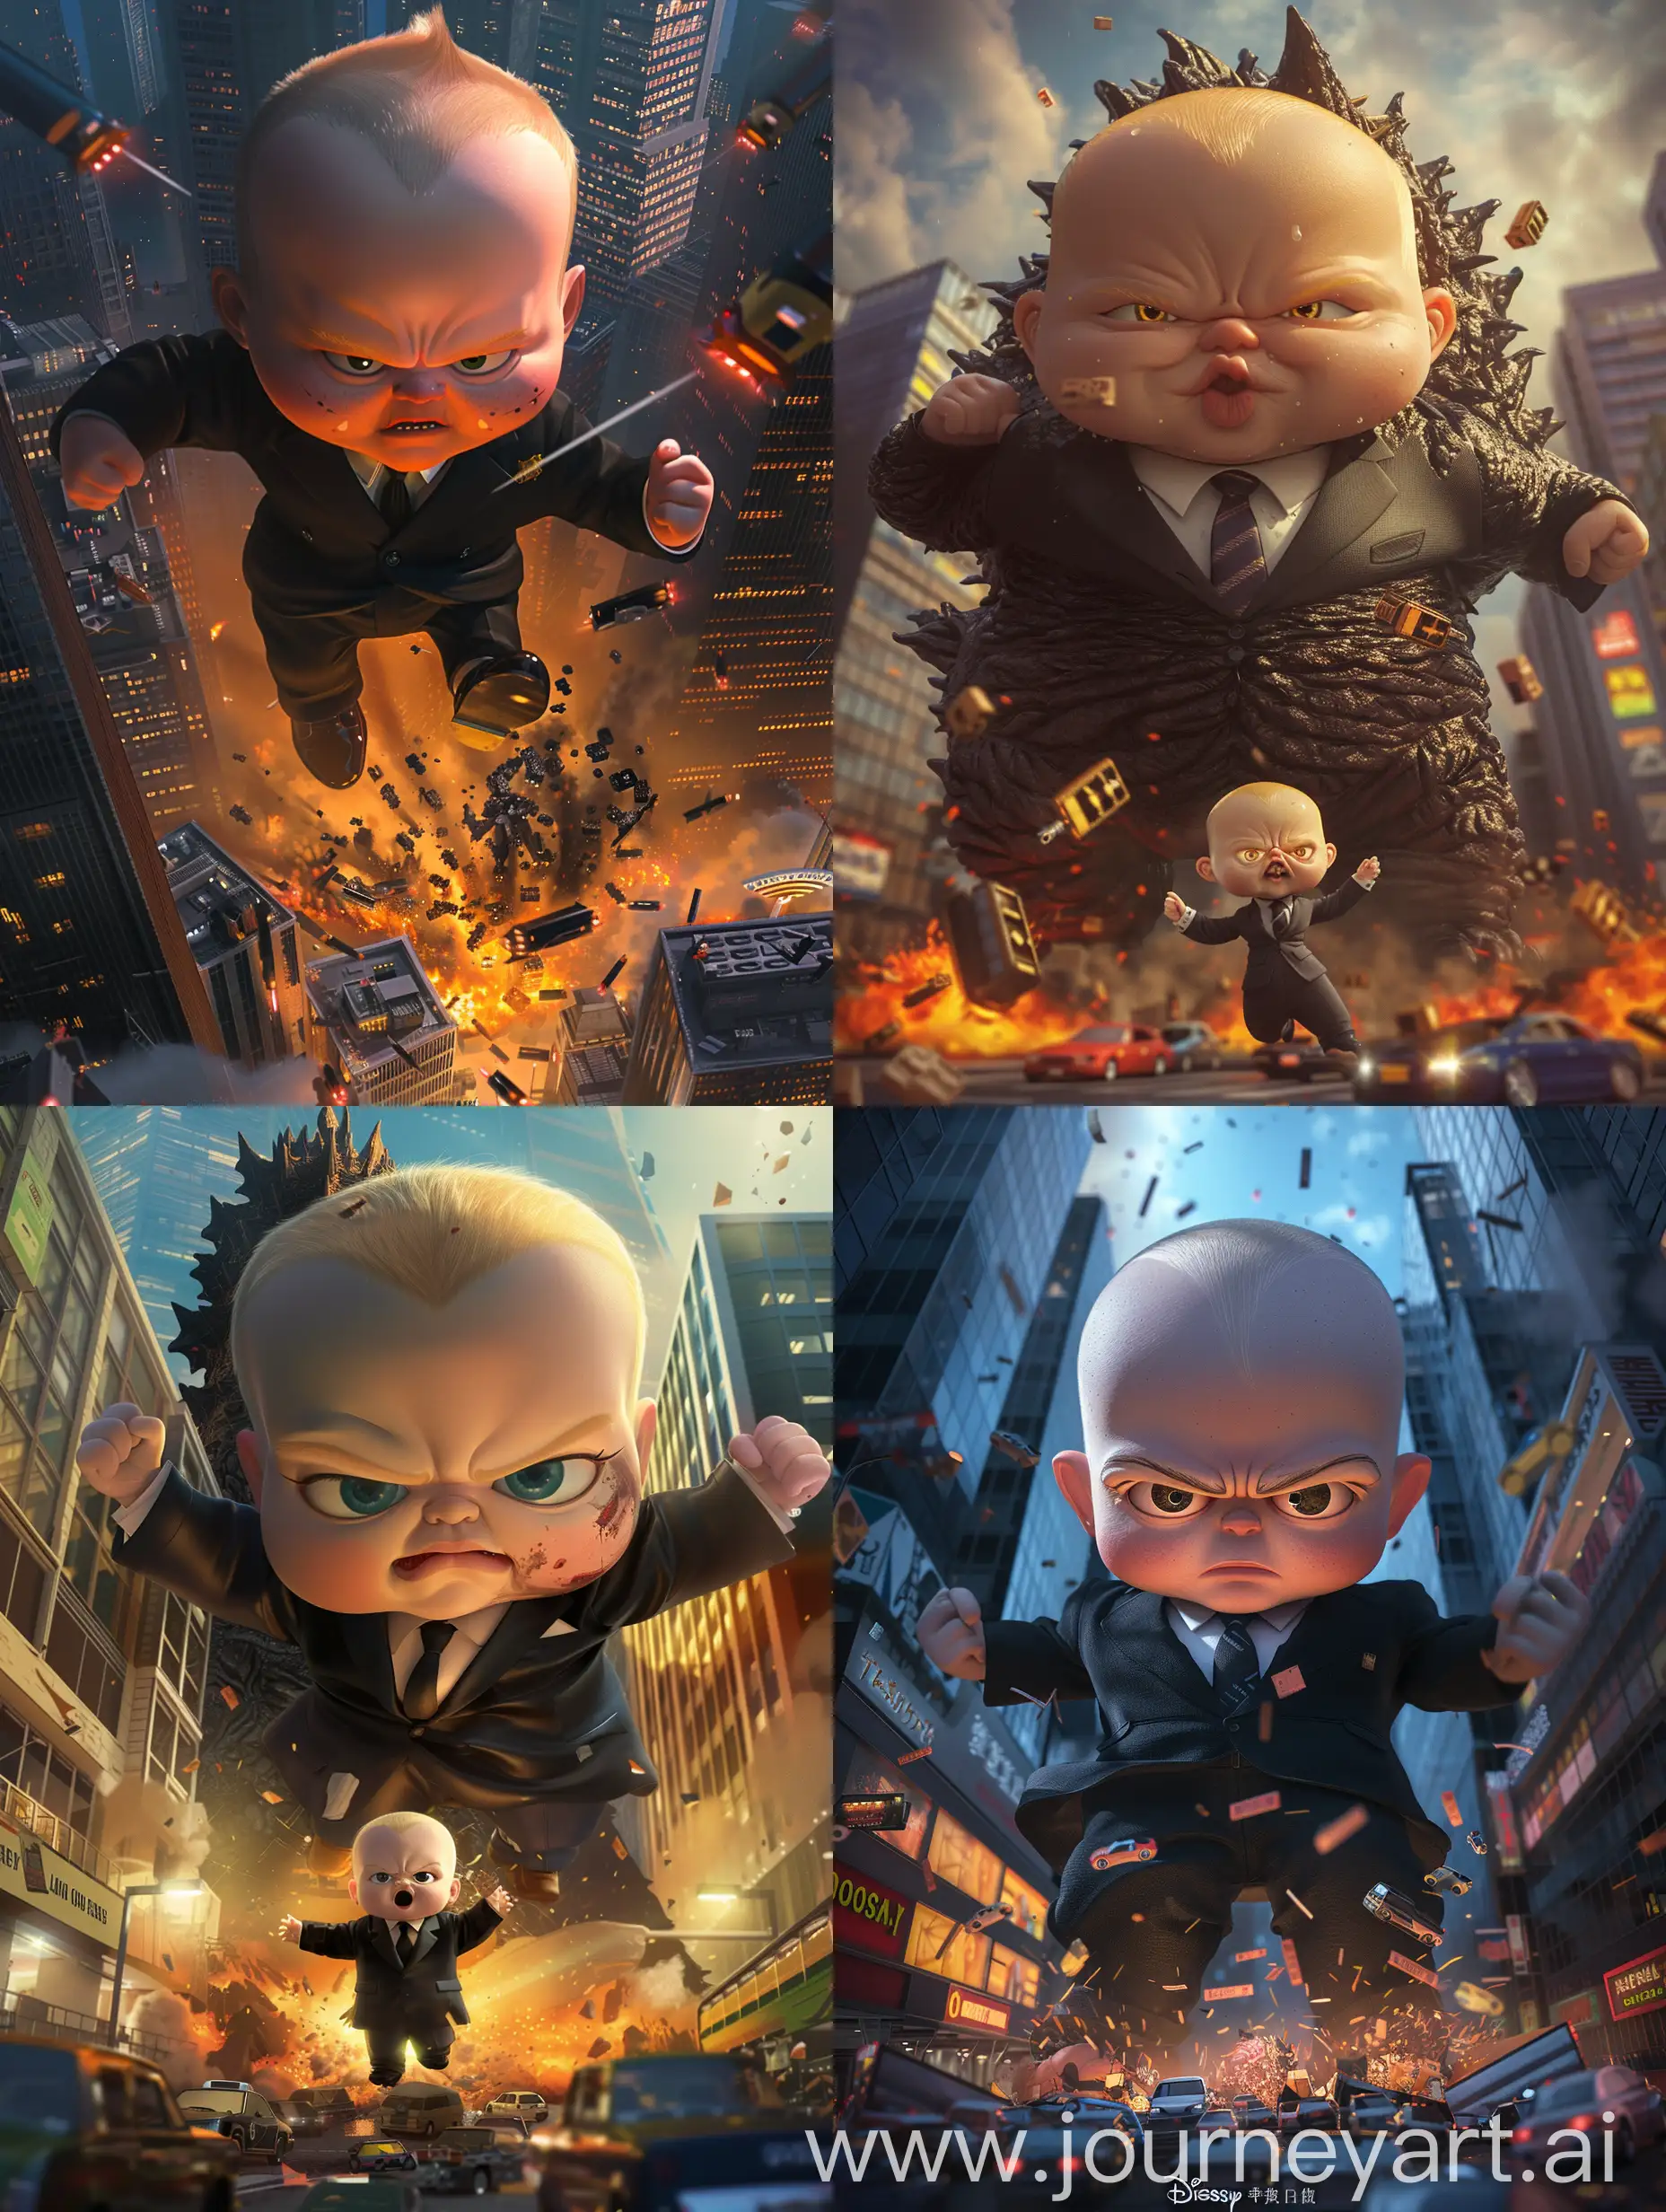 Enormous-Bald-Baby-Rampages-Through-Tokyo-Photorealistic-HiRes-Scene